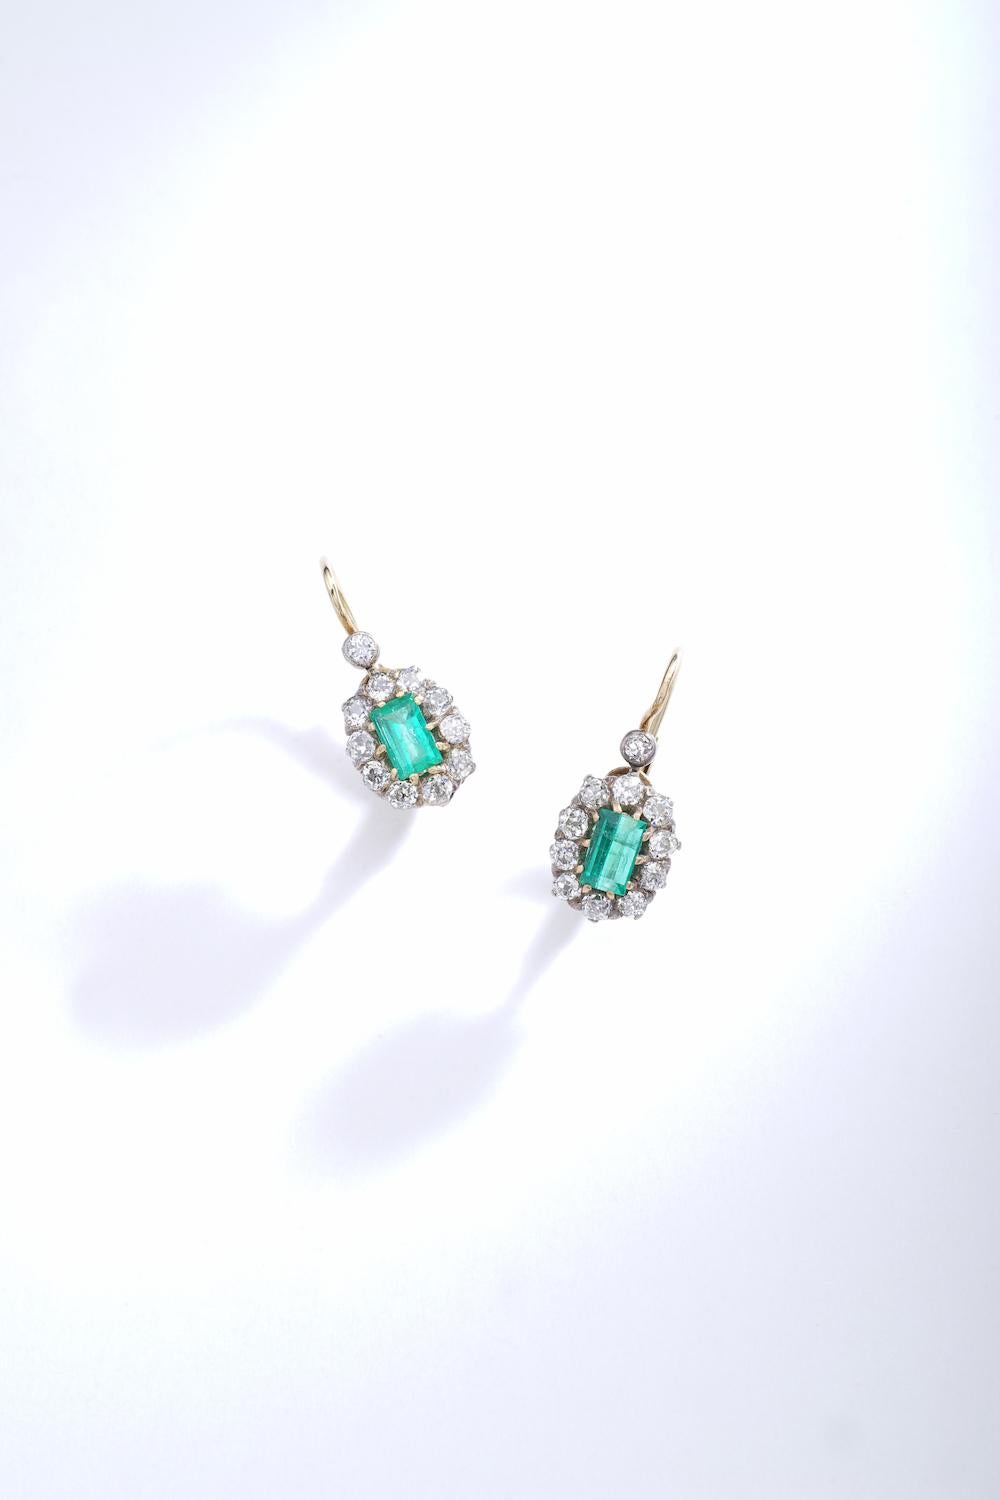 Antique Emerald Diamond Silver Gold Pair of Earrings 1